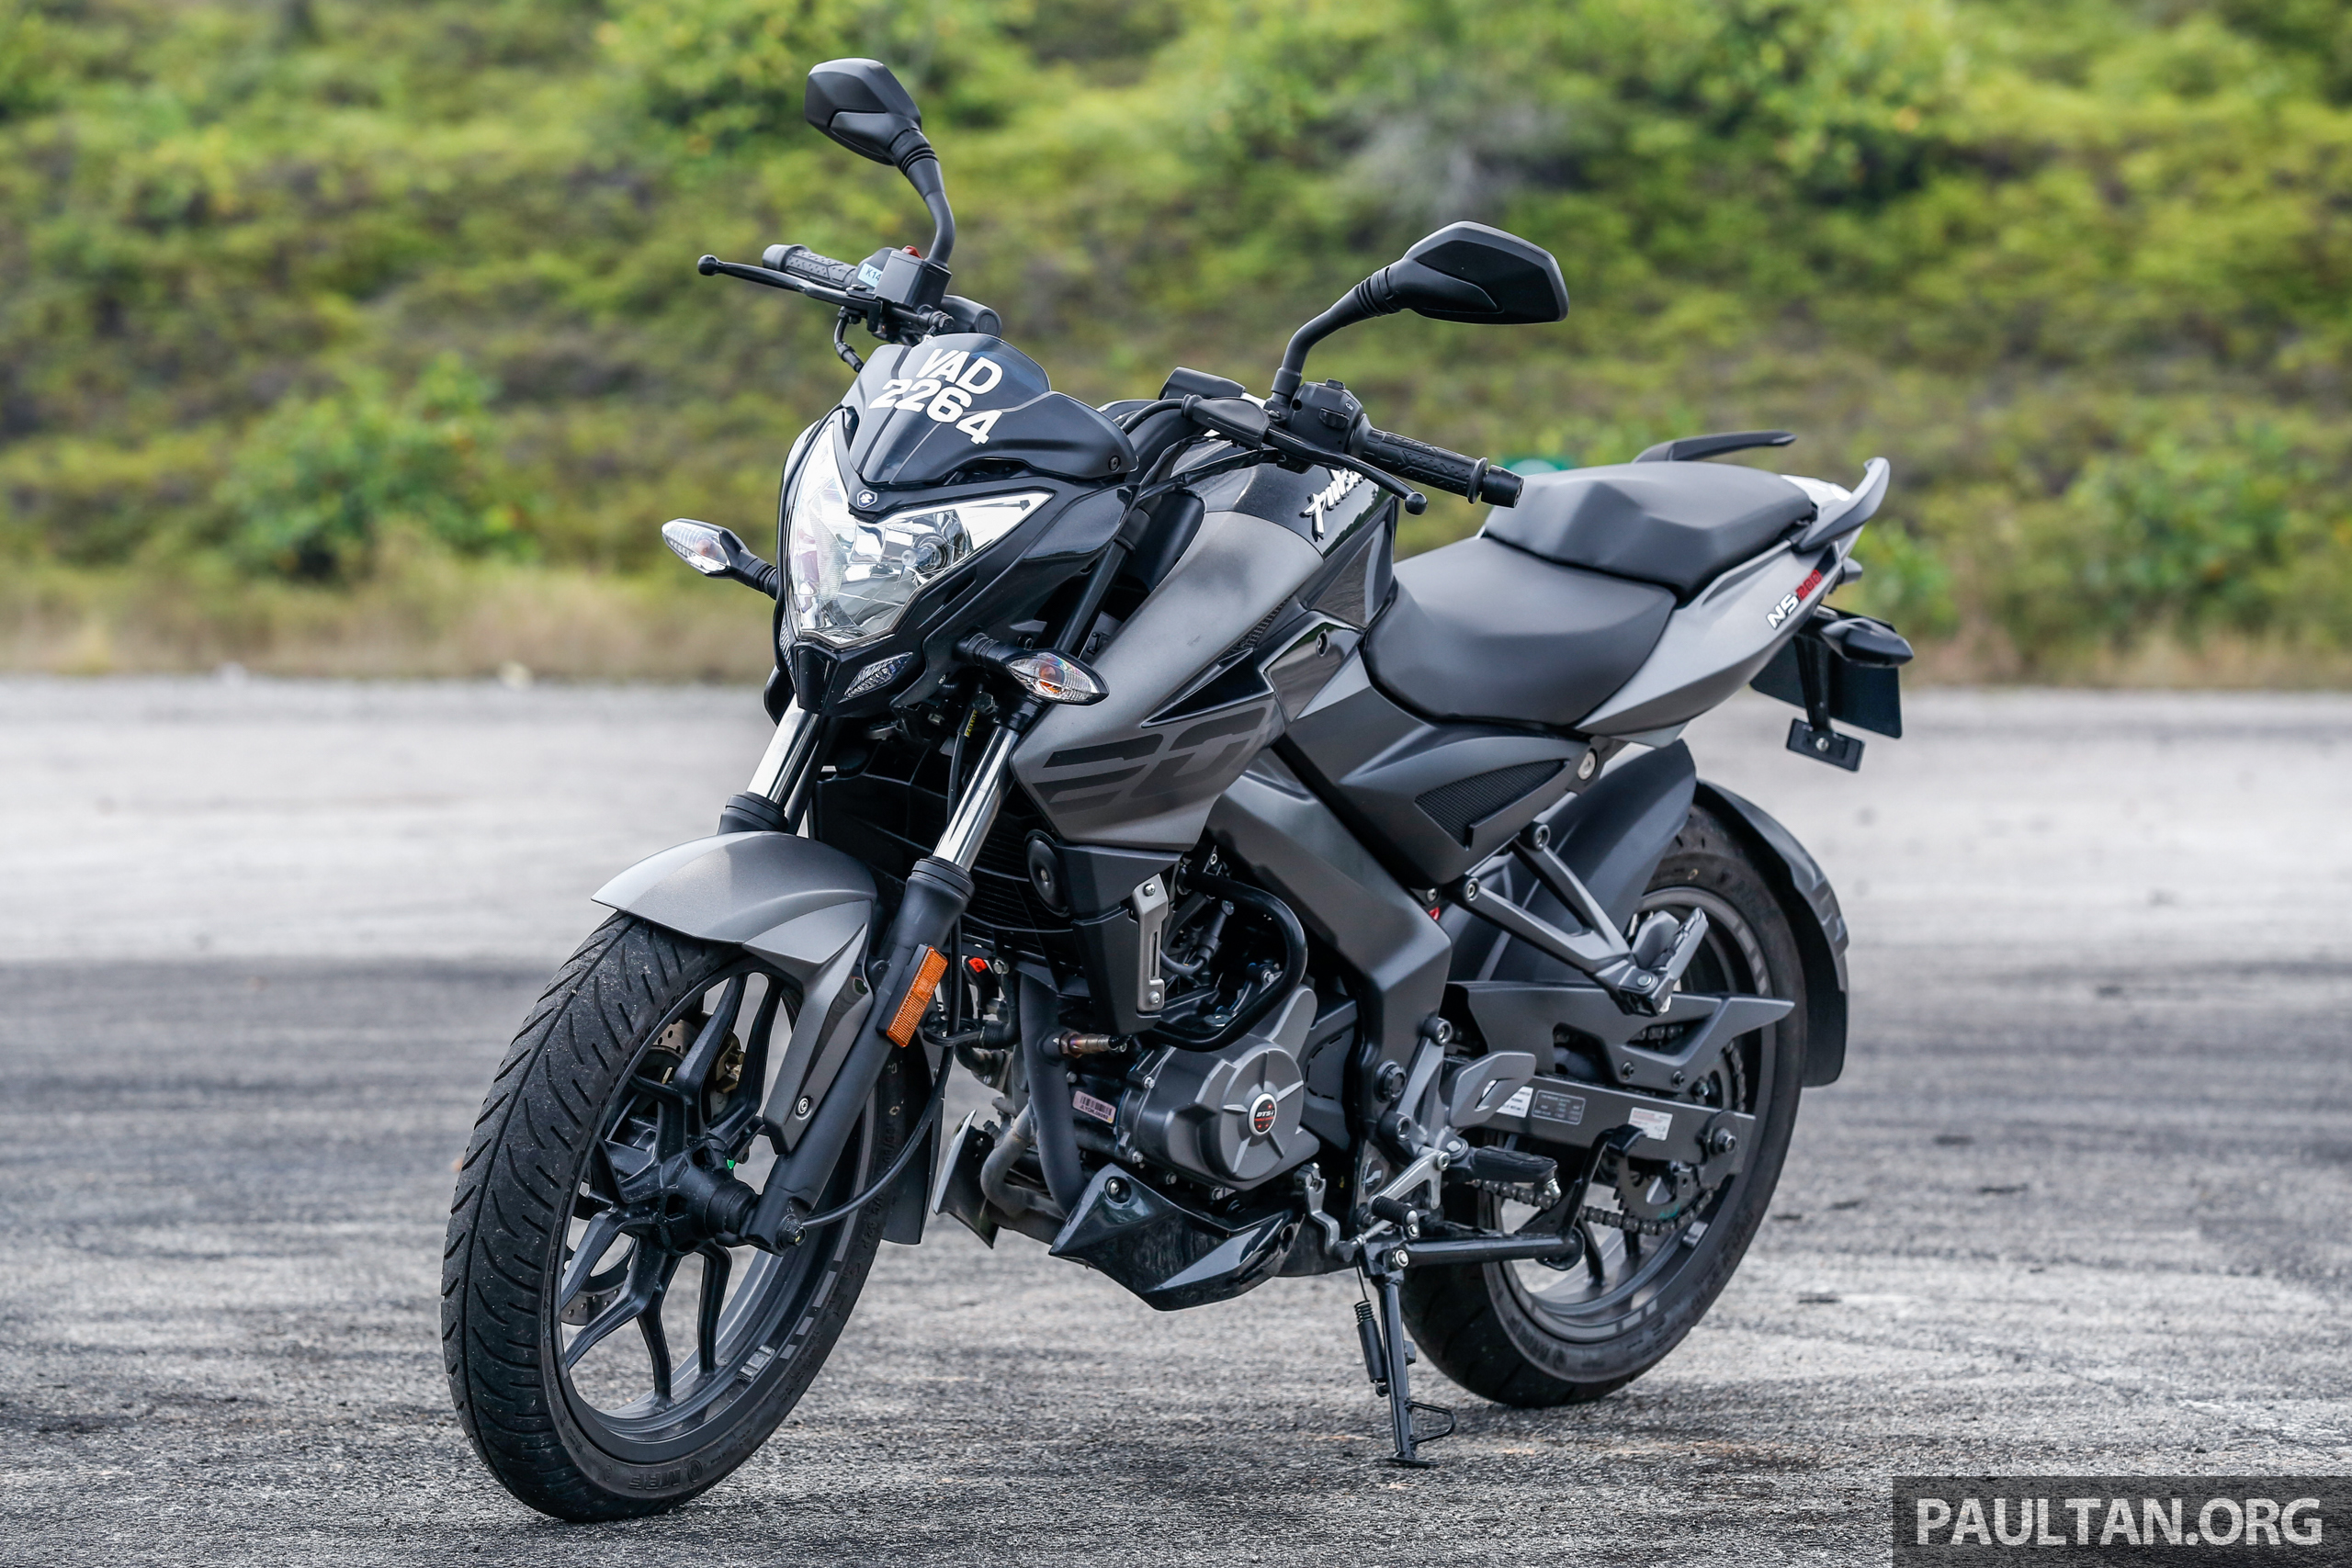 2020 Modenas Pulsar Ns200 With Abs To Be Launched In Malaysia Soon